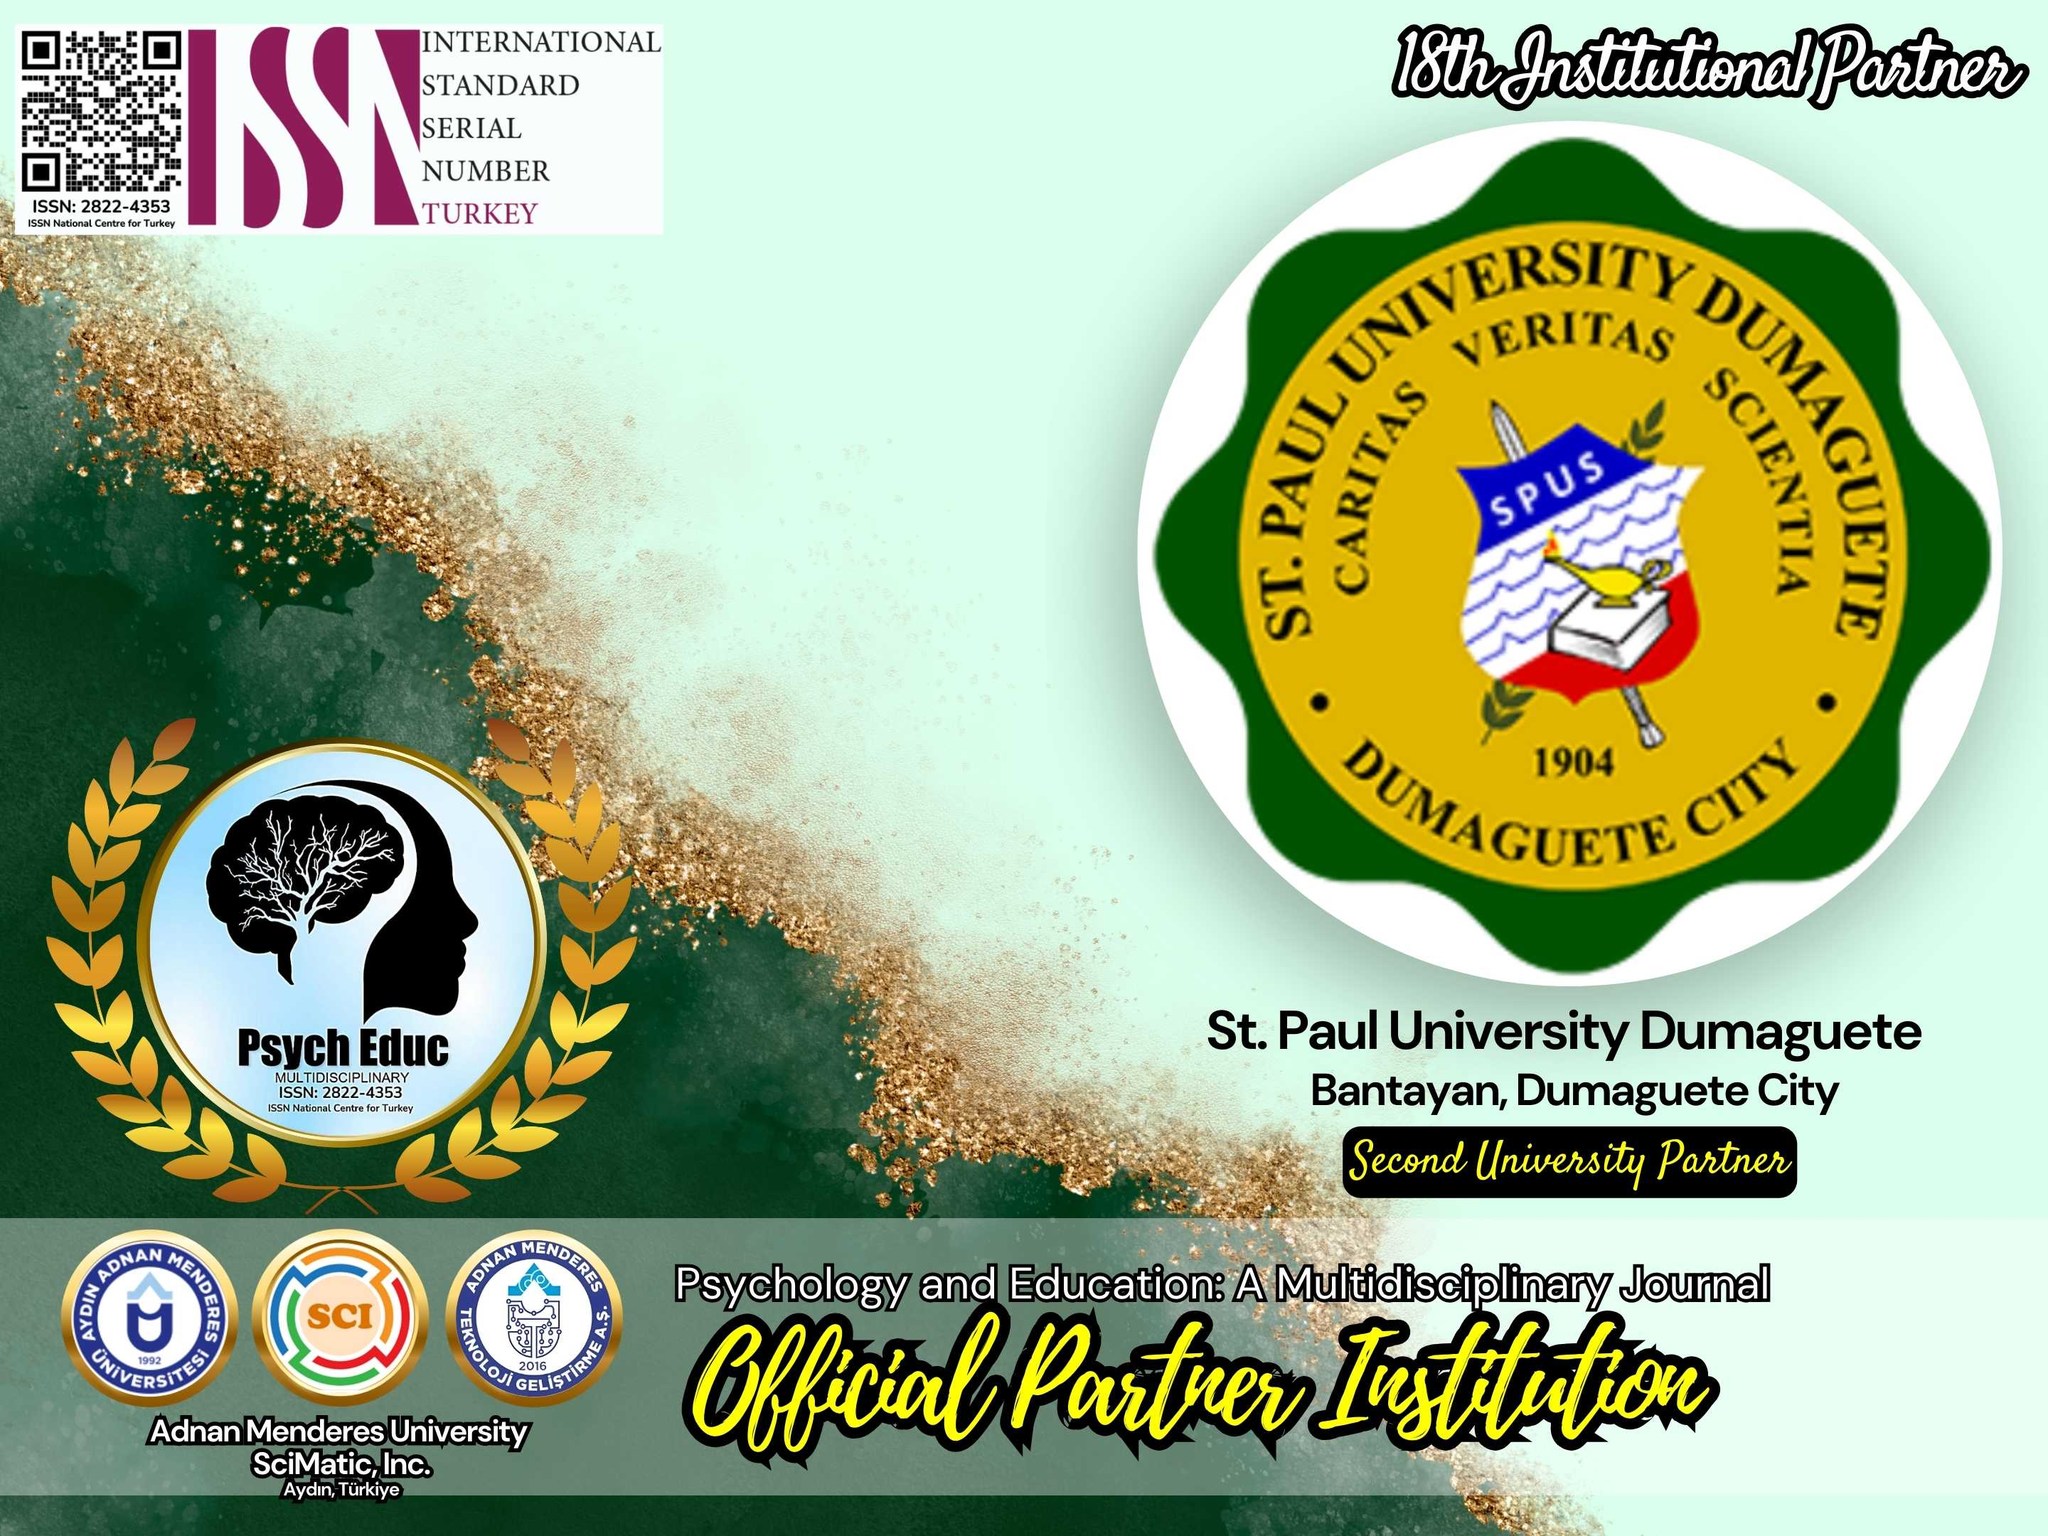 Psychology and Education: A Multidisciplinary Journal (ISSN National Centre for Turkey, ISSN 2822-4353) and St. Paul University Dumaguete are now officially partner in promoting culture of research.